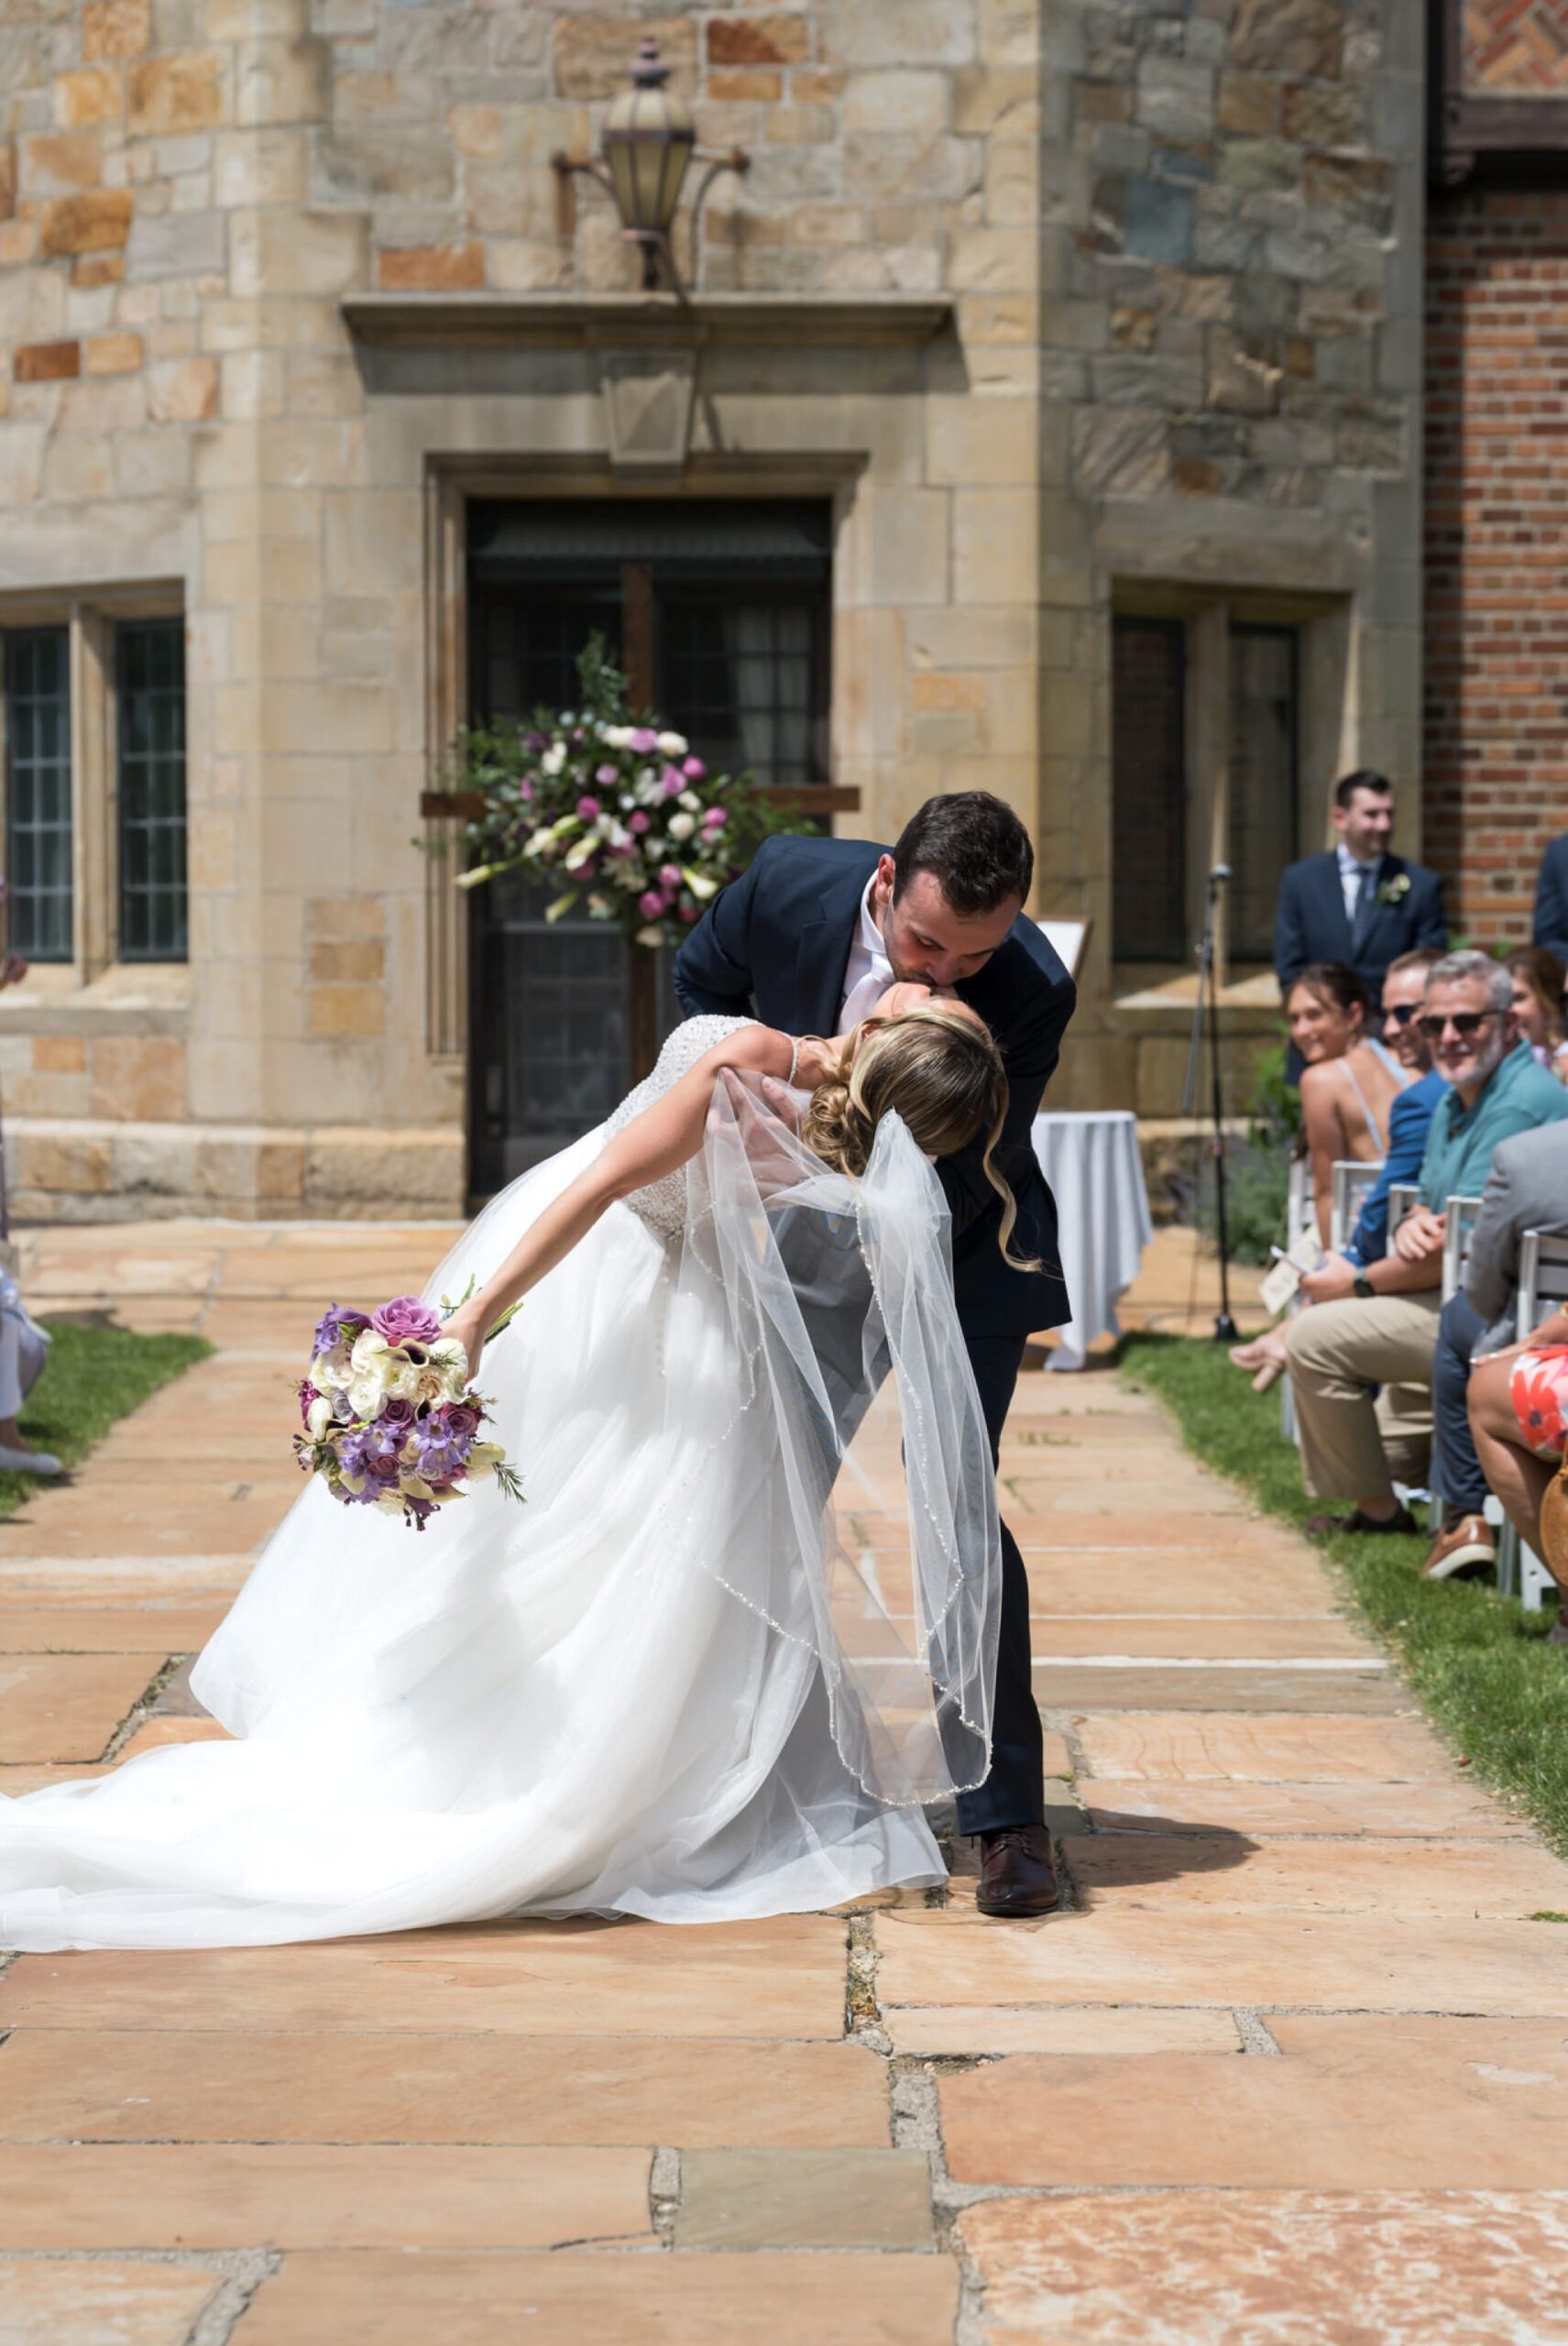 Bride and groom celebrate and kiss as they walk down the aisle at their wedding at Meadowbrook Hall in the Pegasus Garden. 